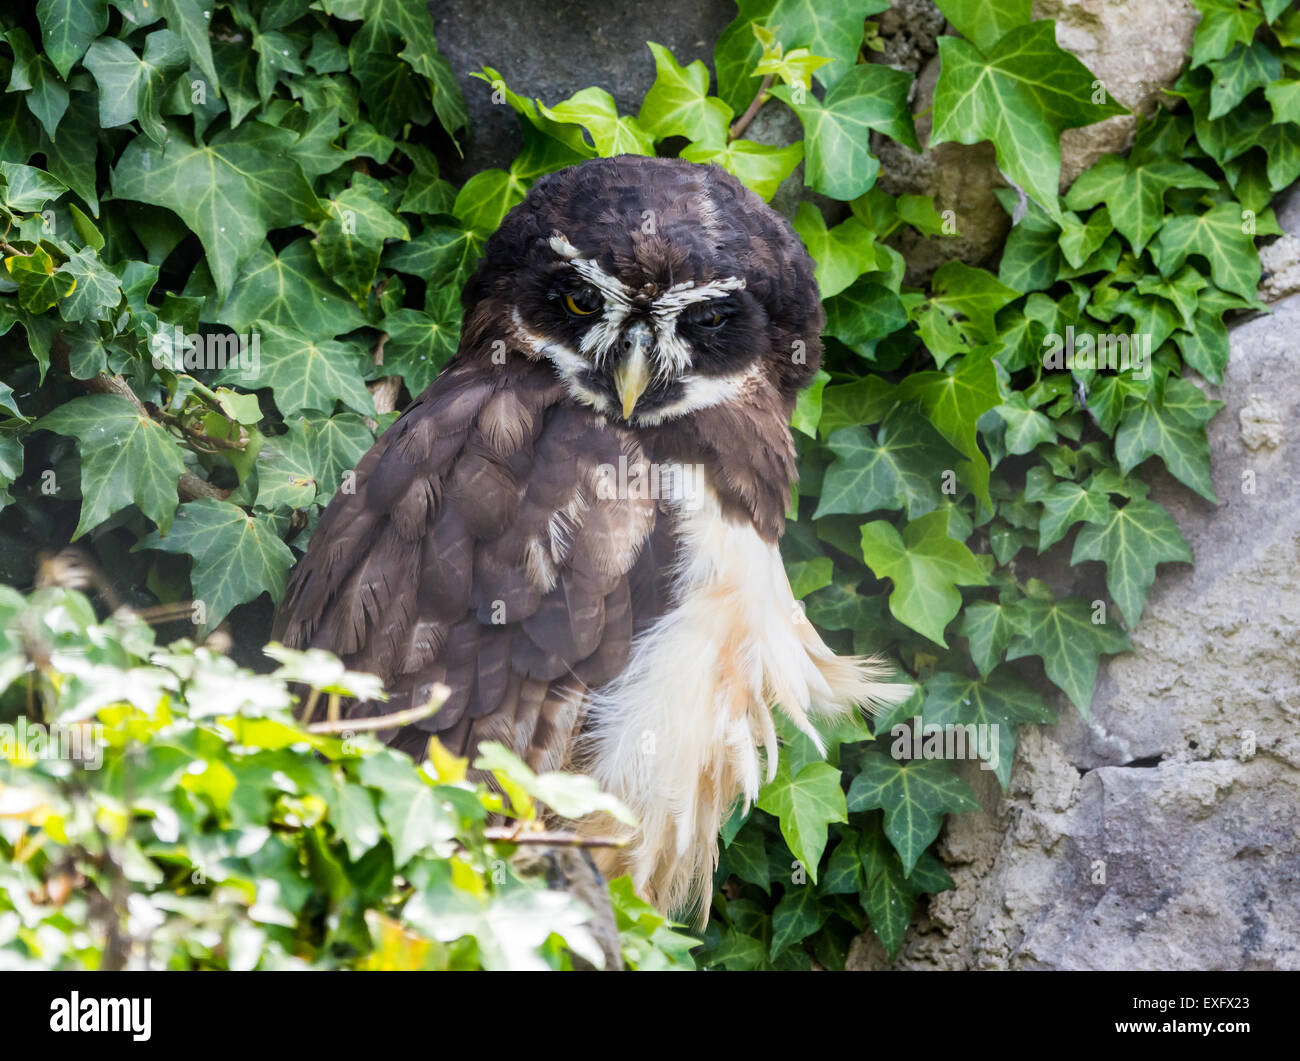 A Spectacled Owl (Pulsatrix perspicillata) stands in green leaves. Stock Photo